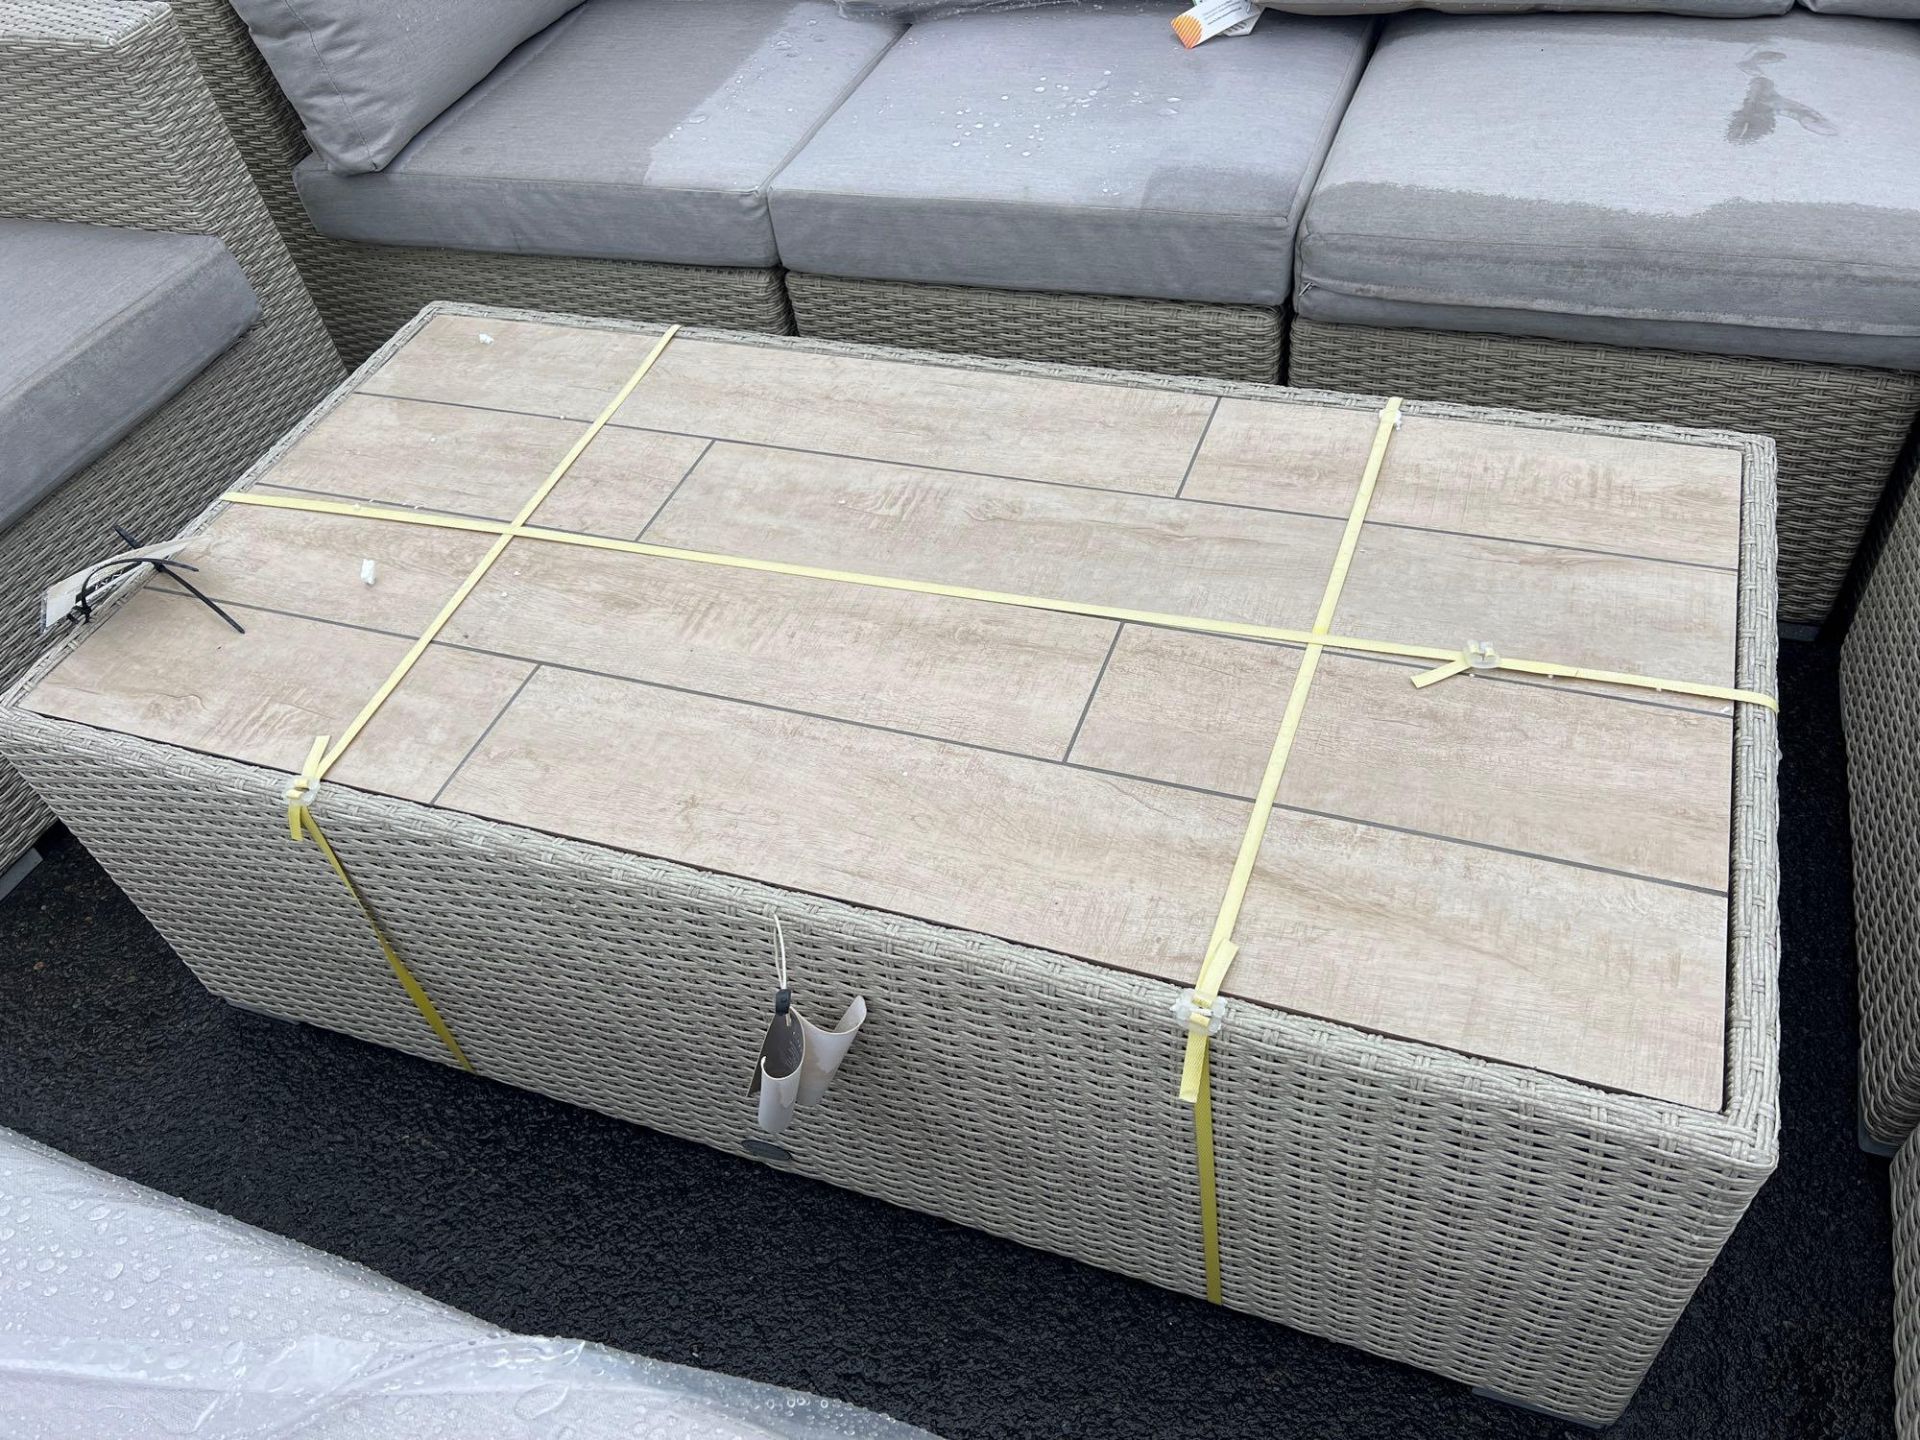 A100 Kingscote Modular Sofa with large coffee table and chair - Nutmeg Elevate your outdoor living - Image 3 of 4